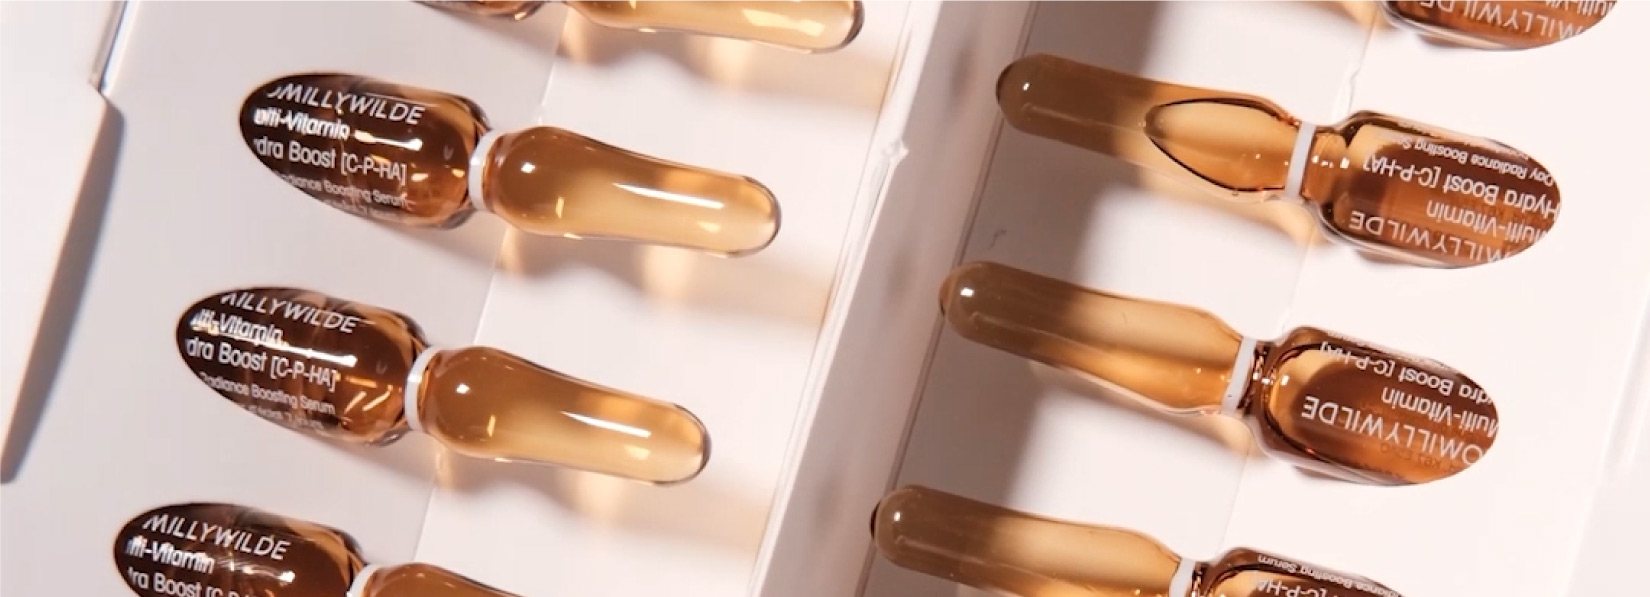 7 Day Radiance Serum Ampoules